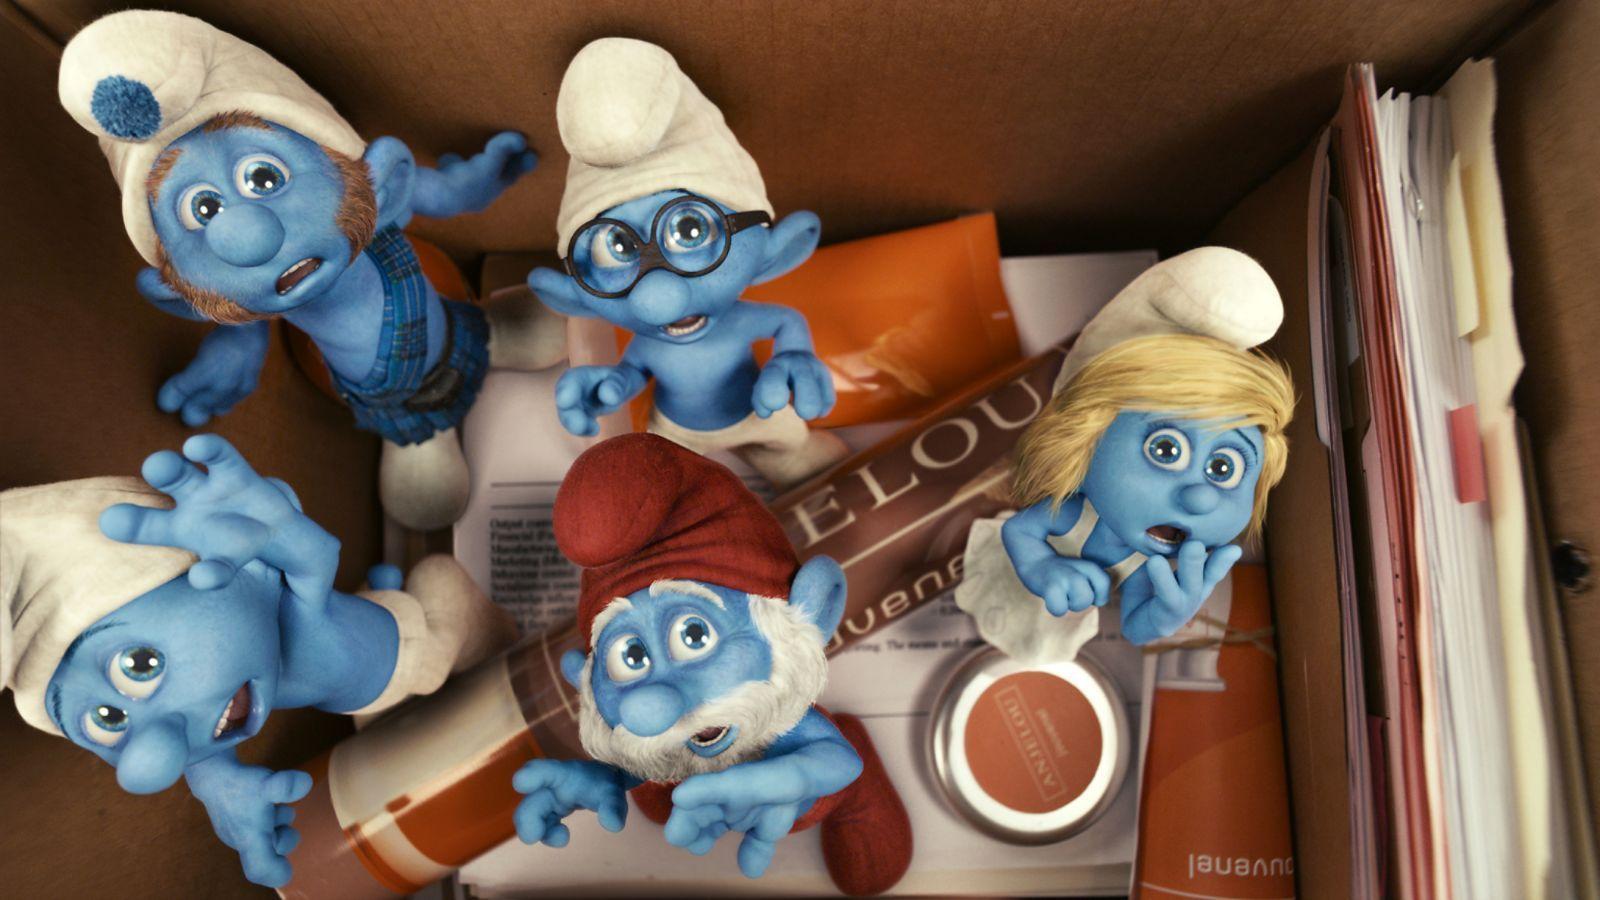 The Smurfs Wallpaper Free For iPhone